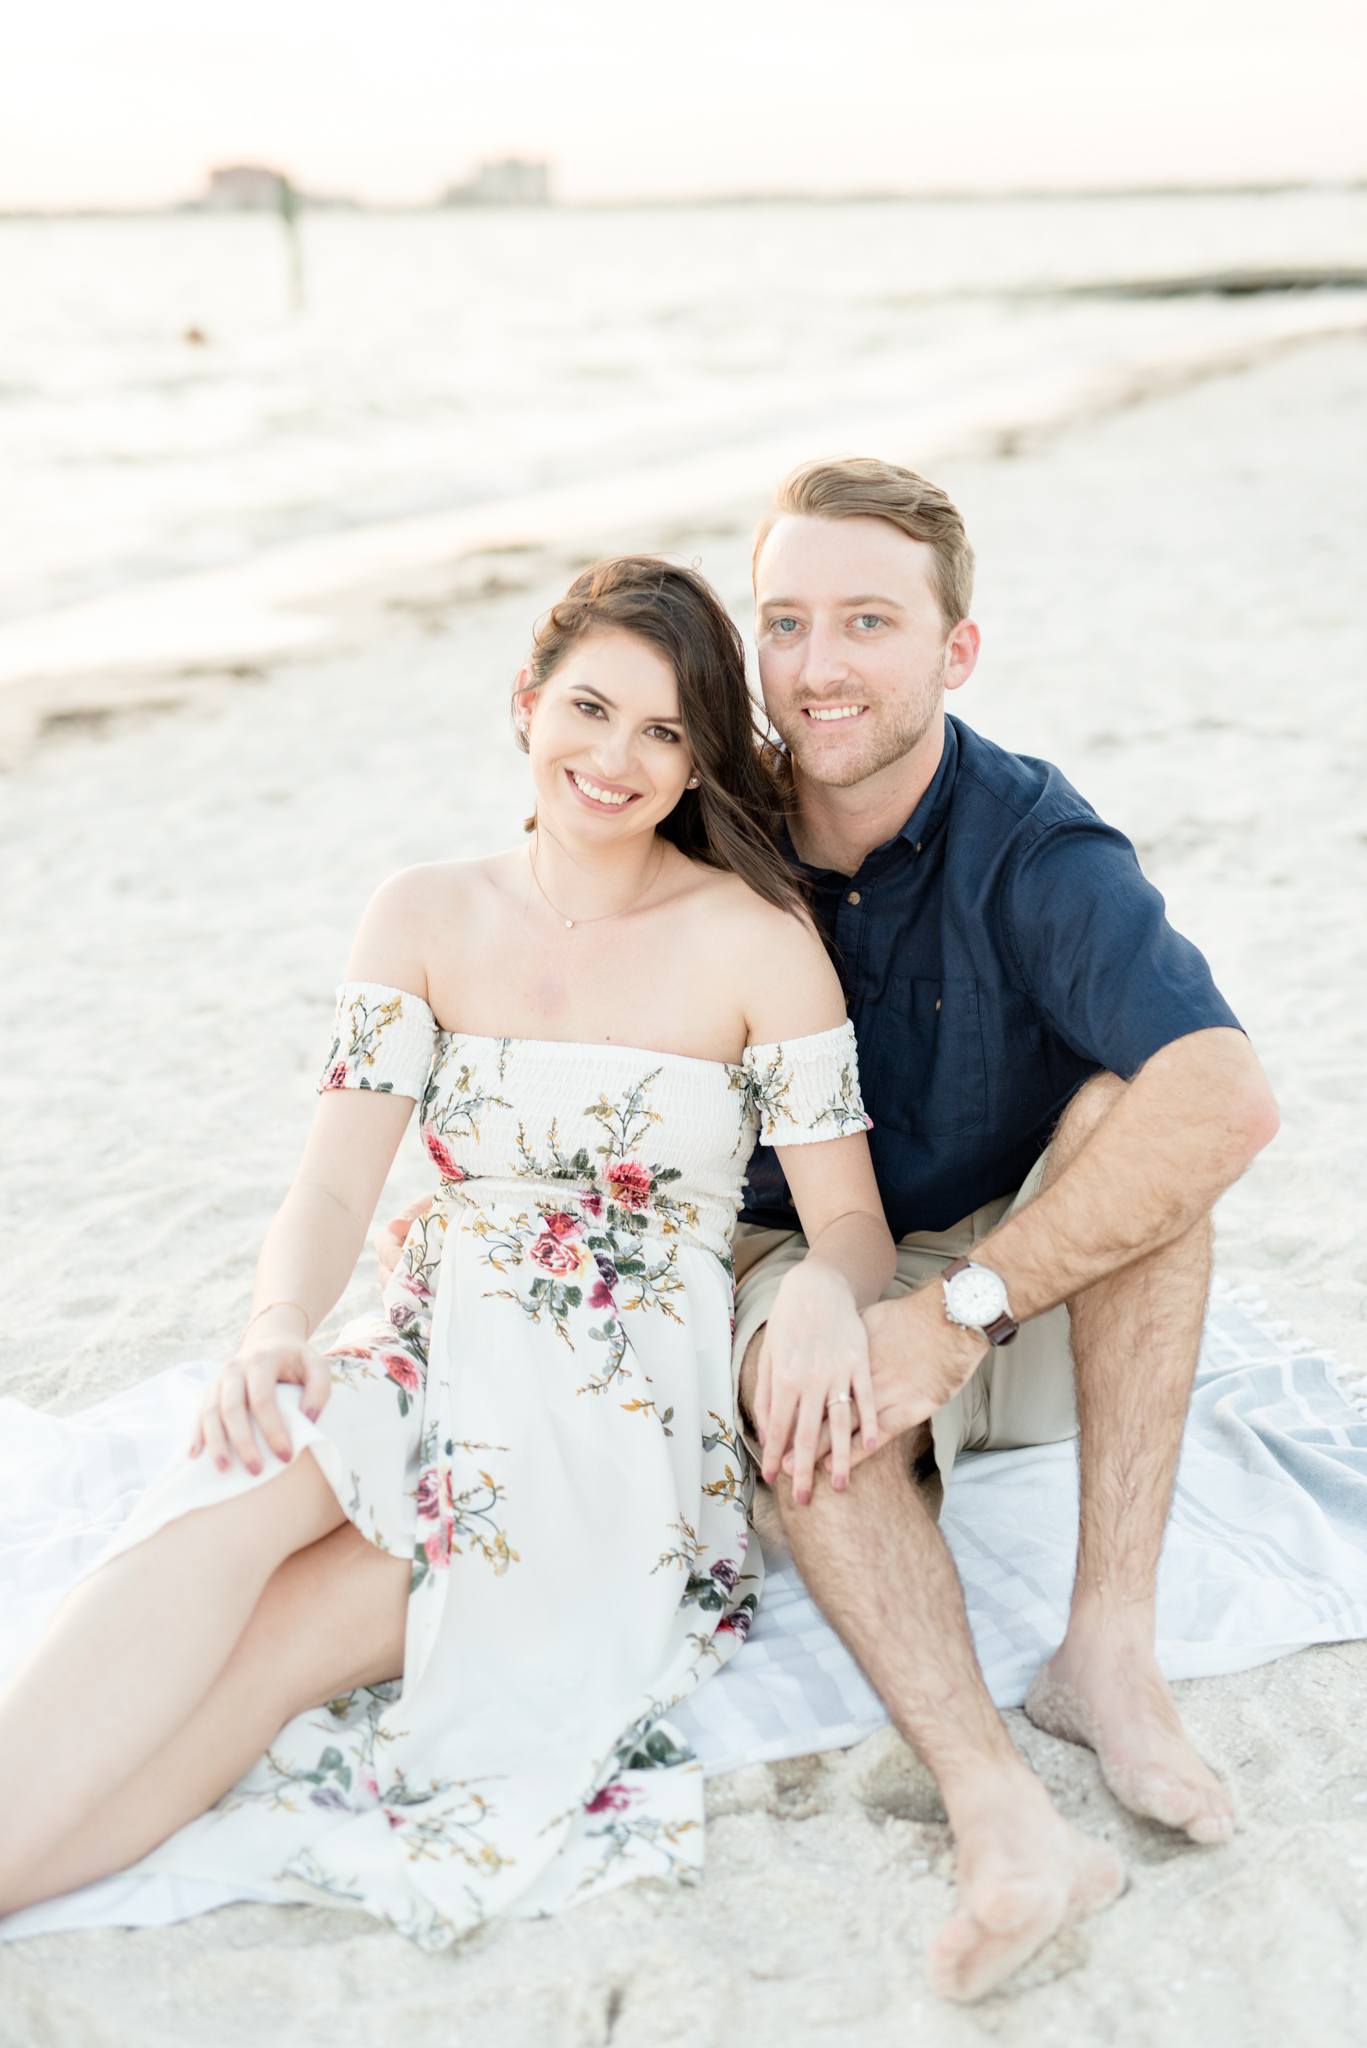 Couple sits on beach and smiles.